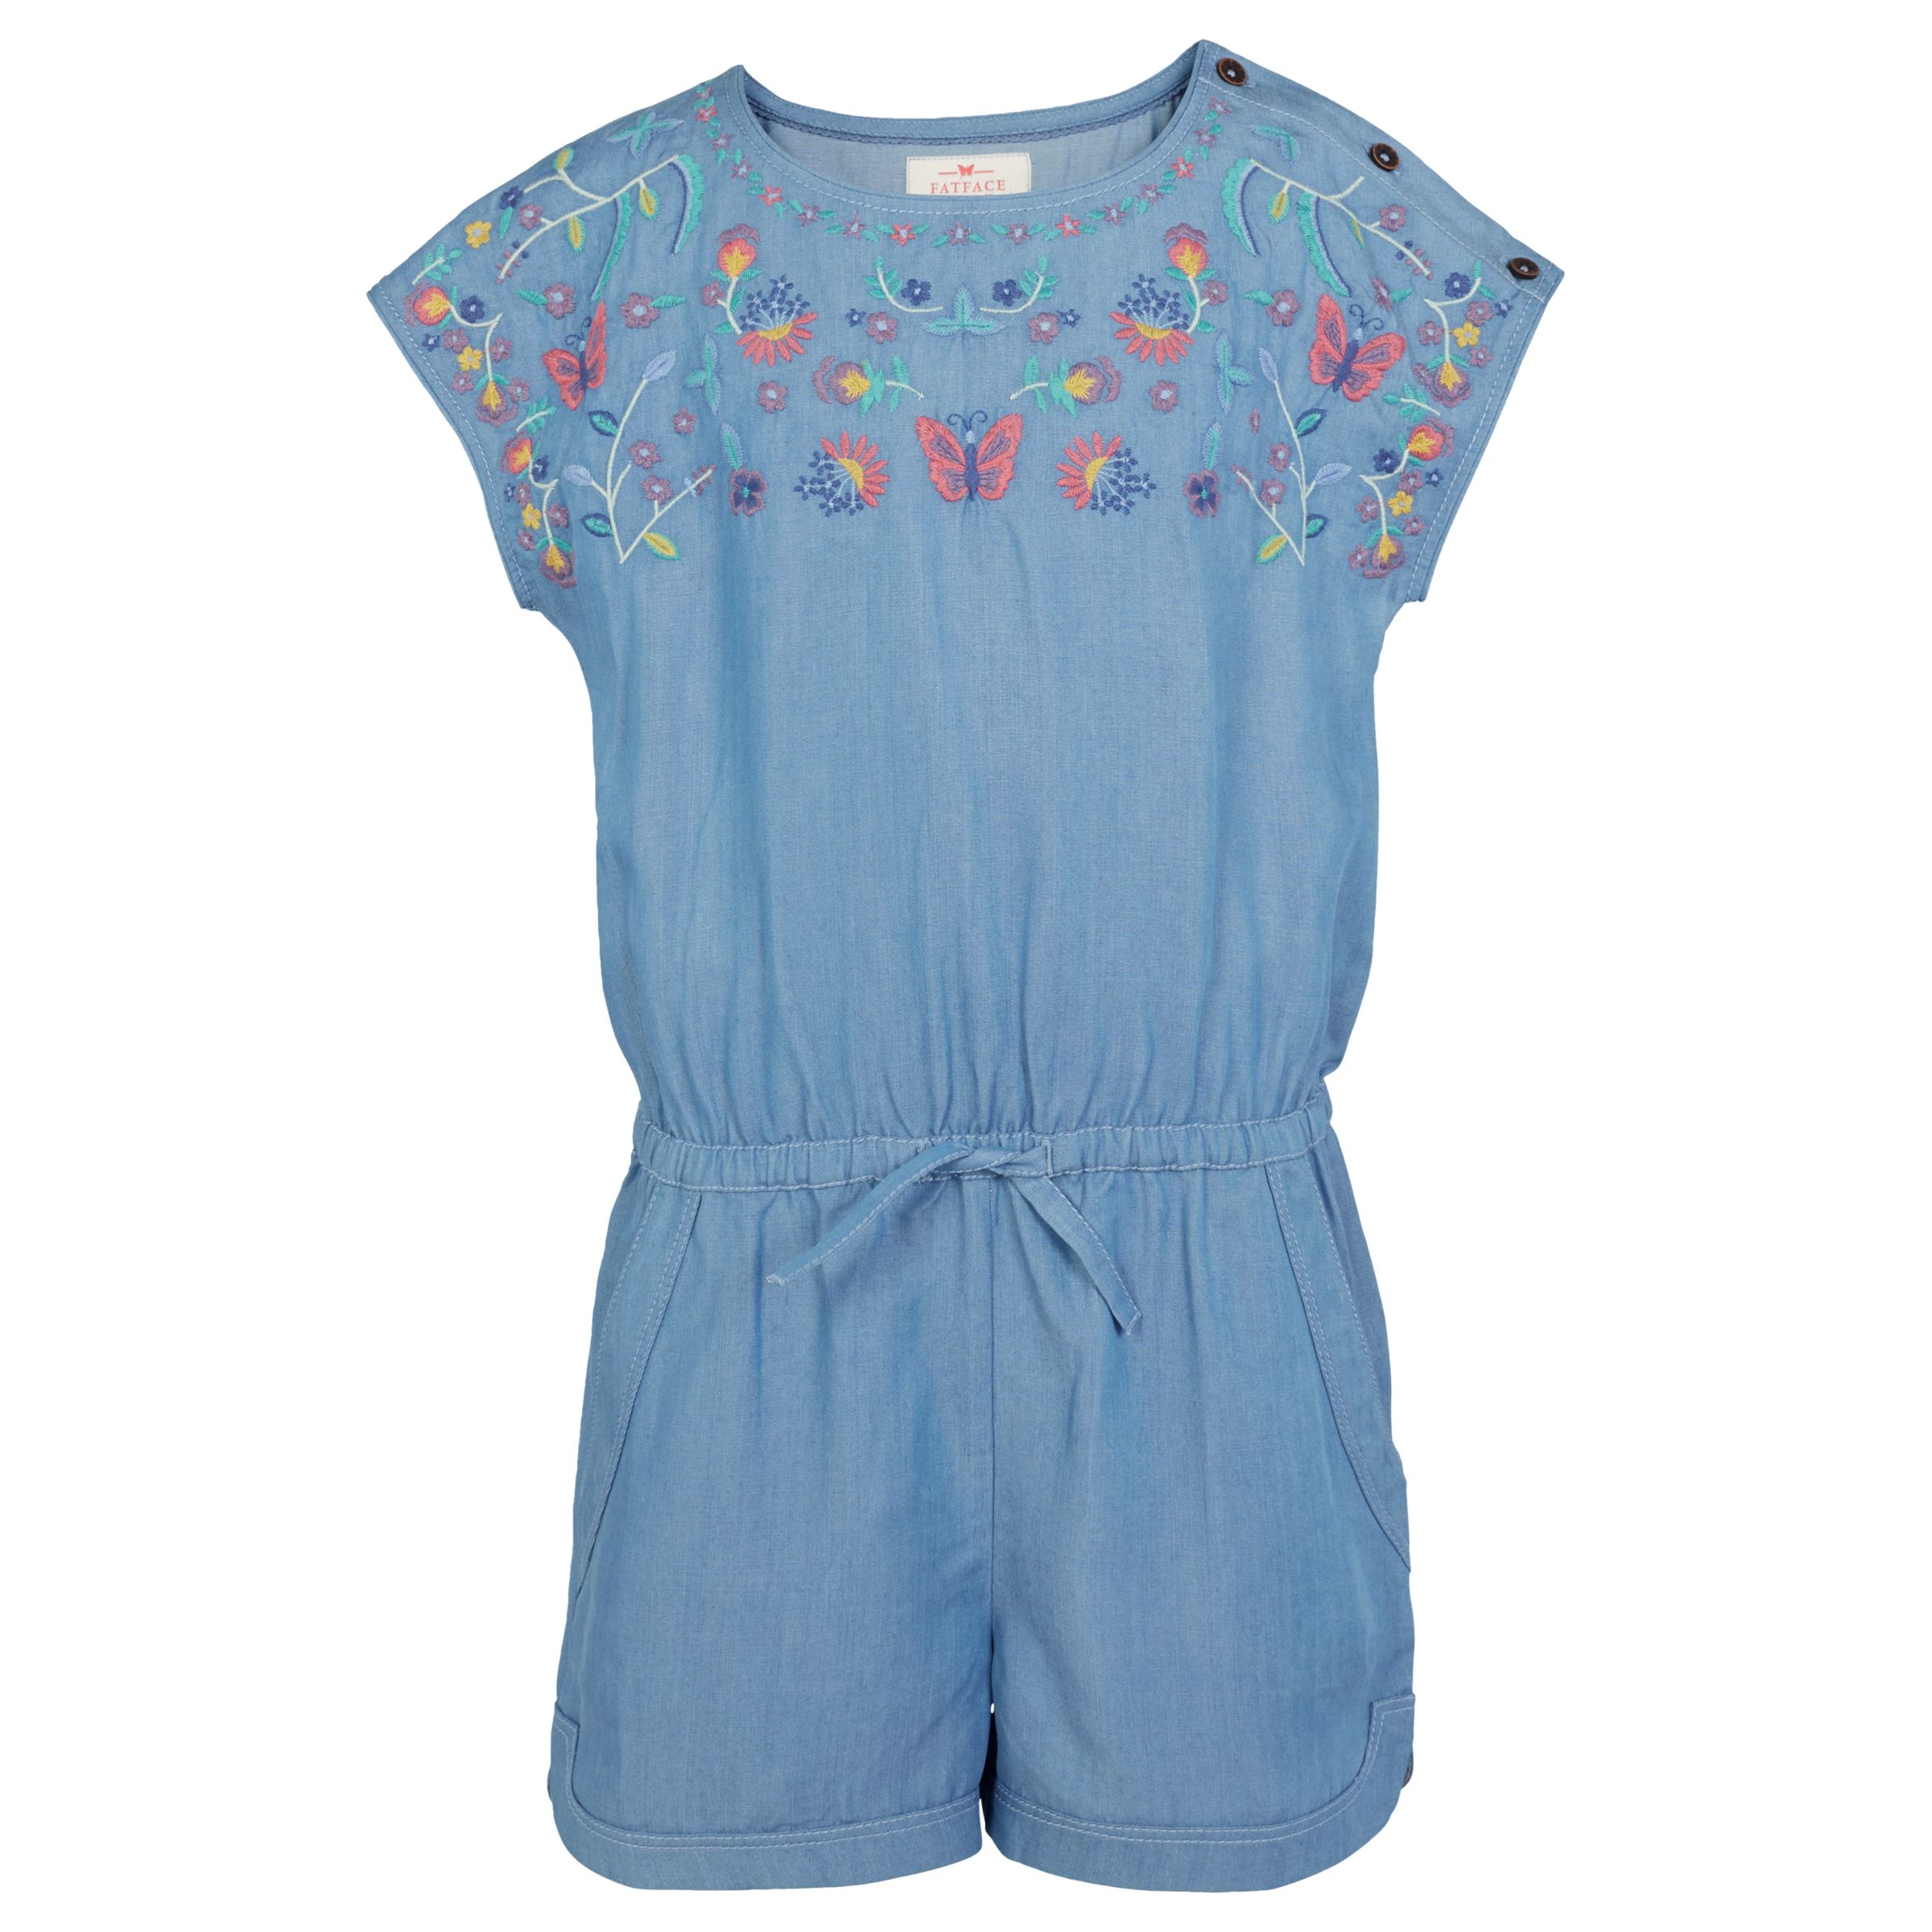 Fat Face Girls' Embroidered Playsuit, Blue